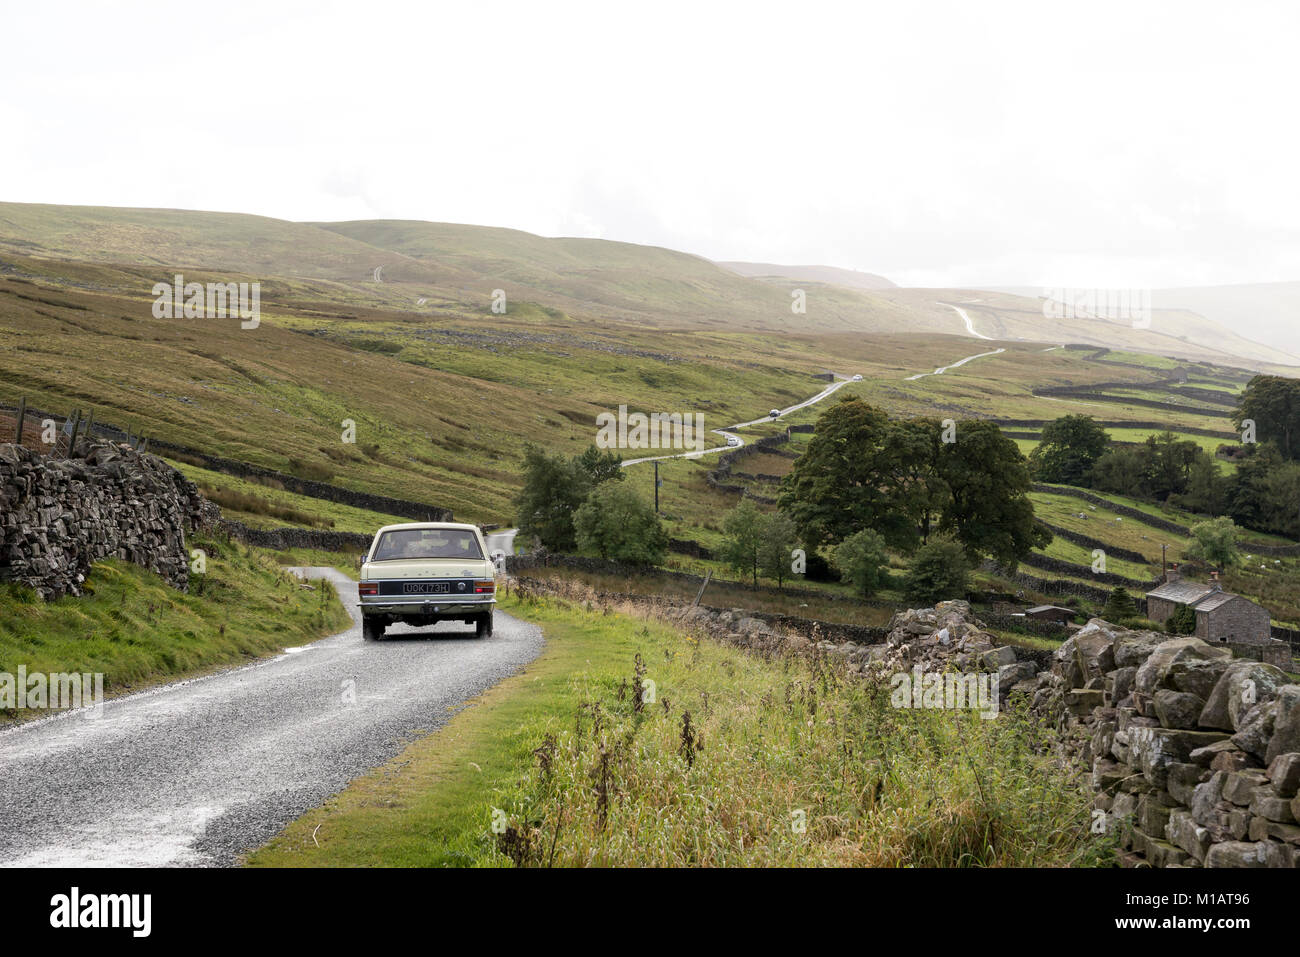 Old car on a remote road in Swaledale, Yorkshire Dales, England. Stock Photo